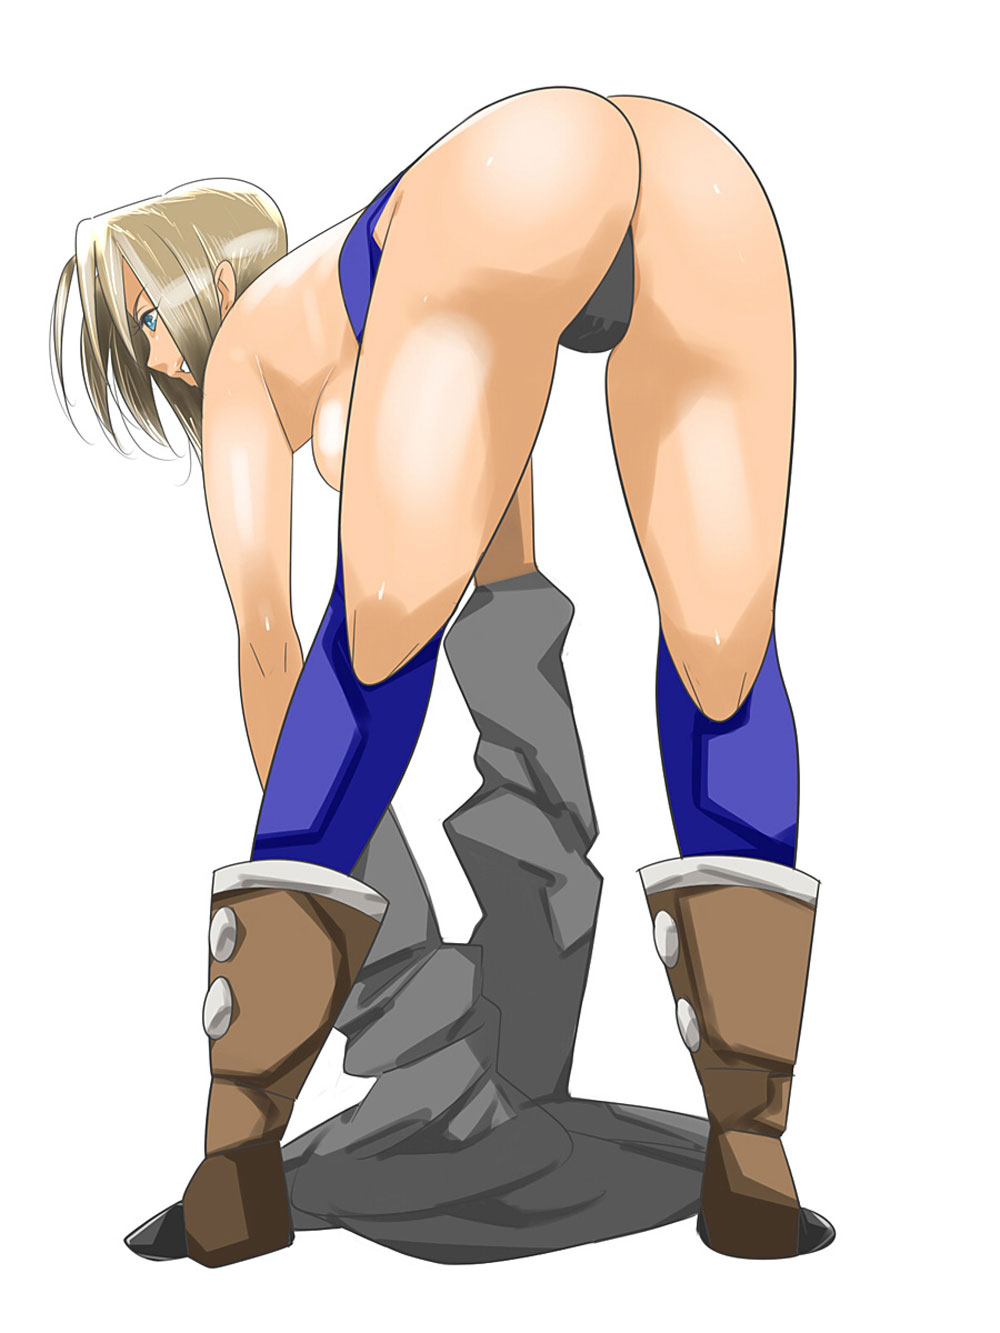 Can You Resist Angel King Of Fighters Hentai Image